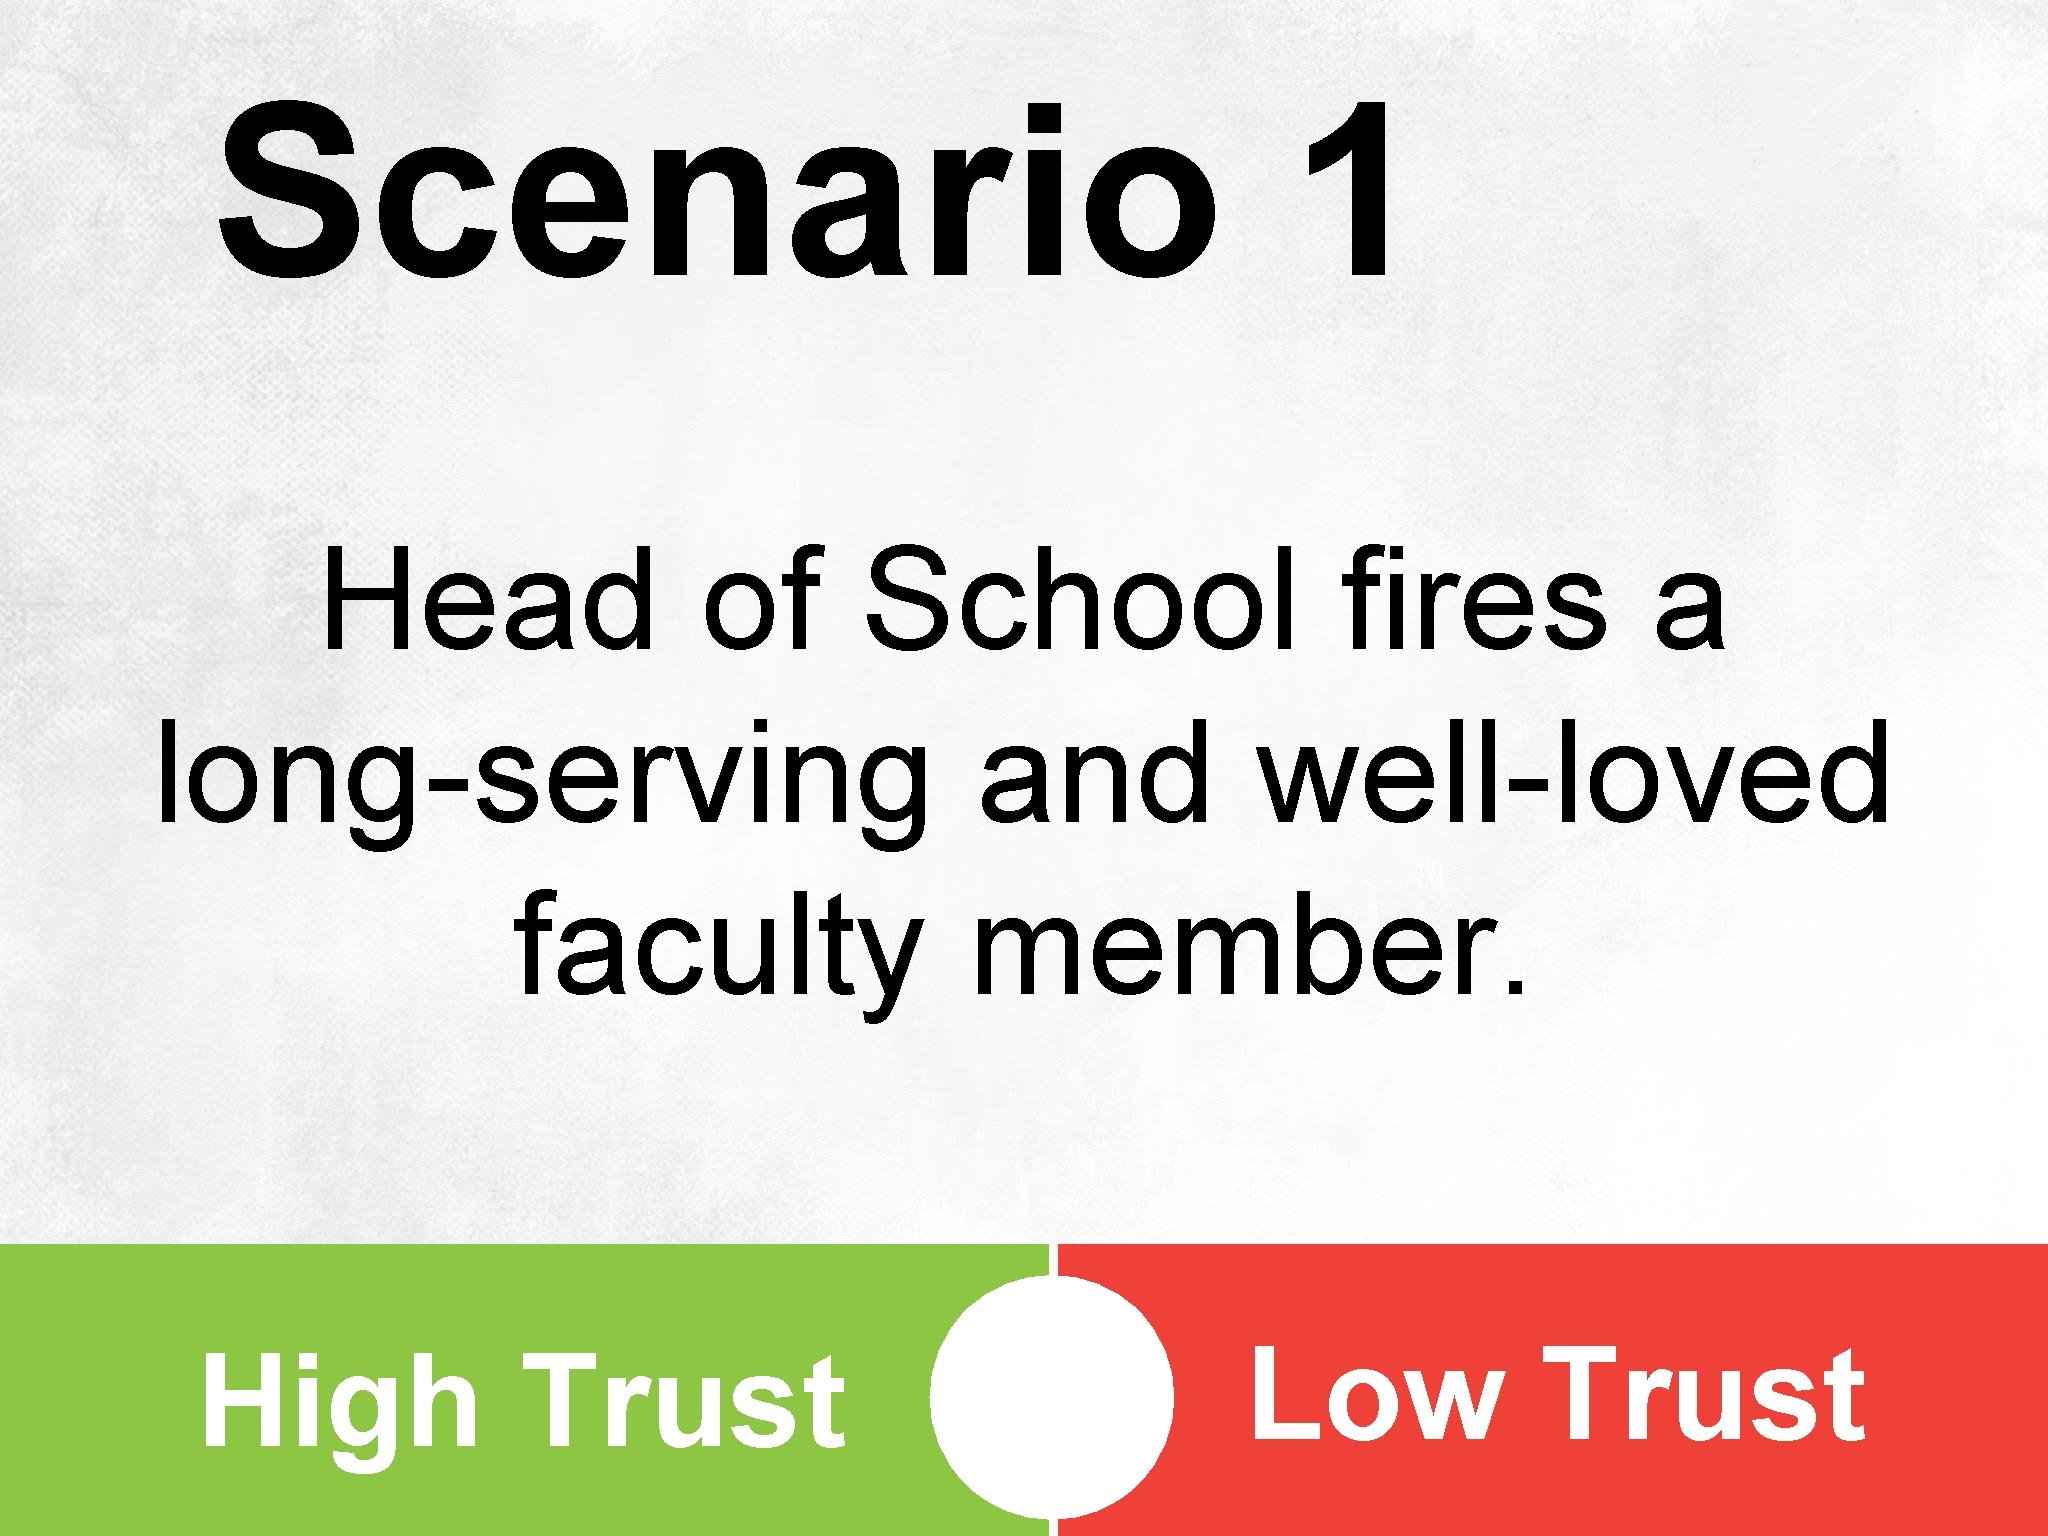 Scenario 1 Head of School fires a long-serving and well-loved faculty member. High Trust